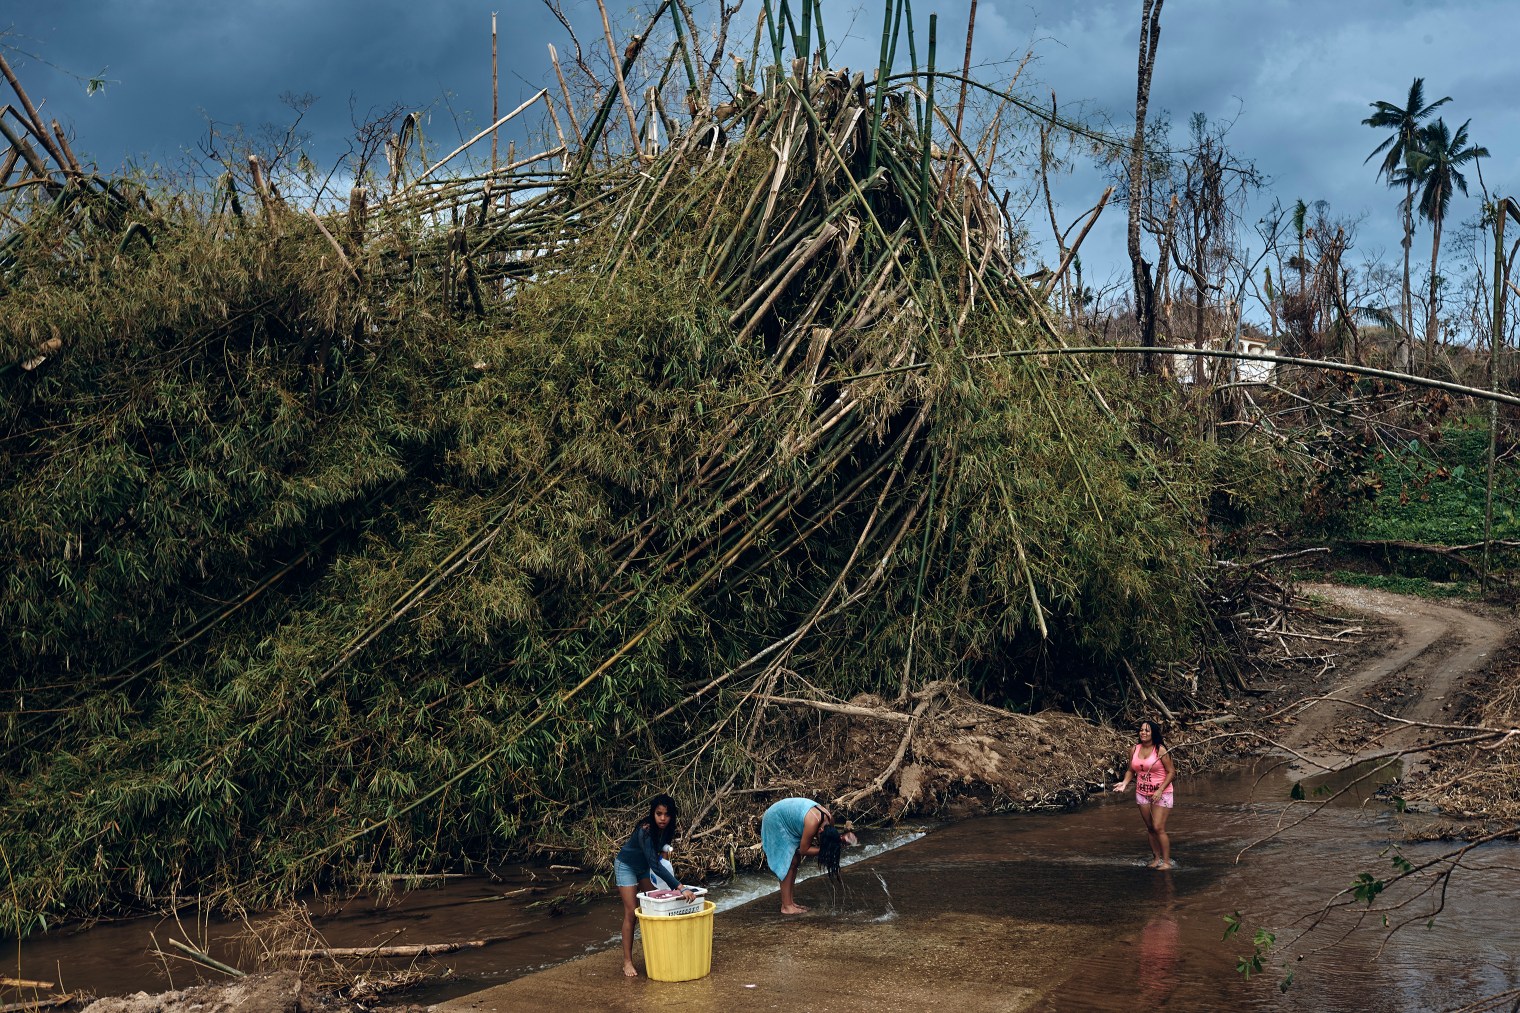 A family bathes in a river in Morovis, Puerto Rico, on Oct. 1, 2017.